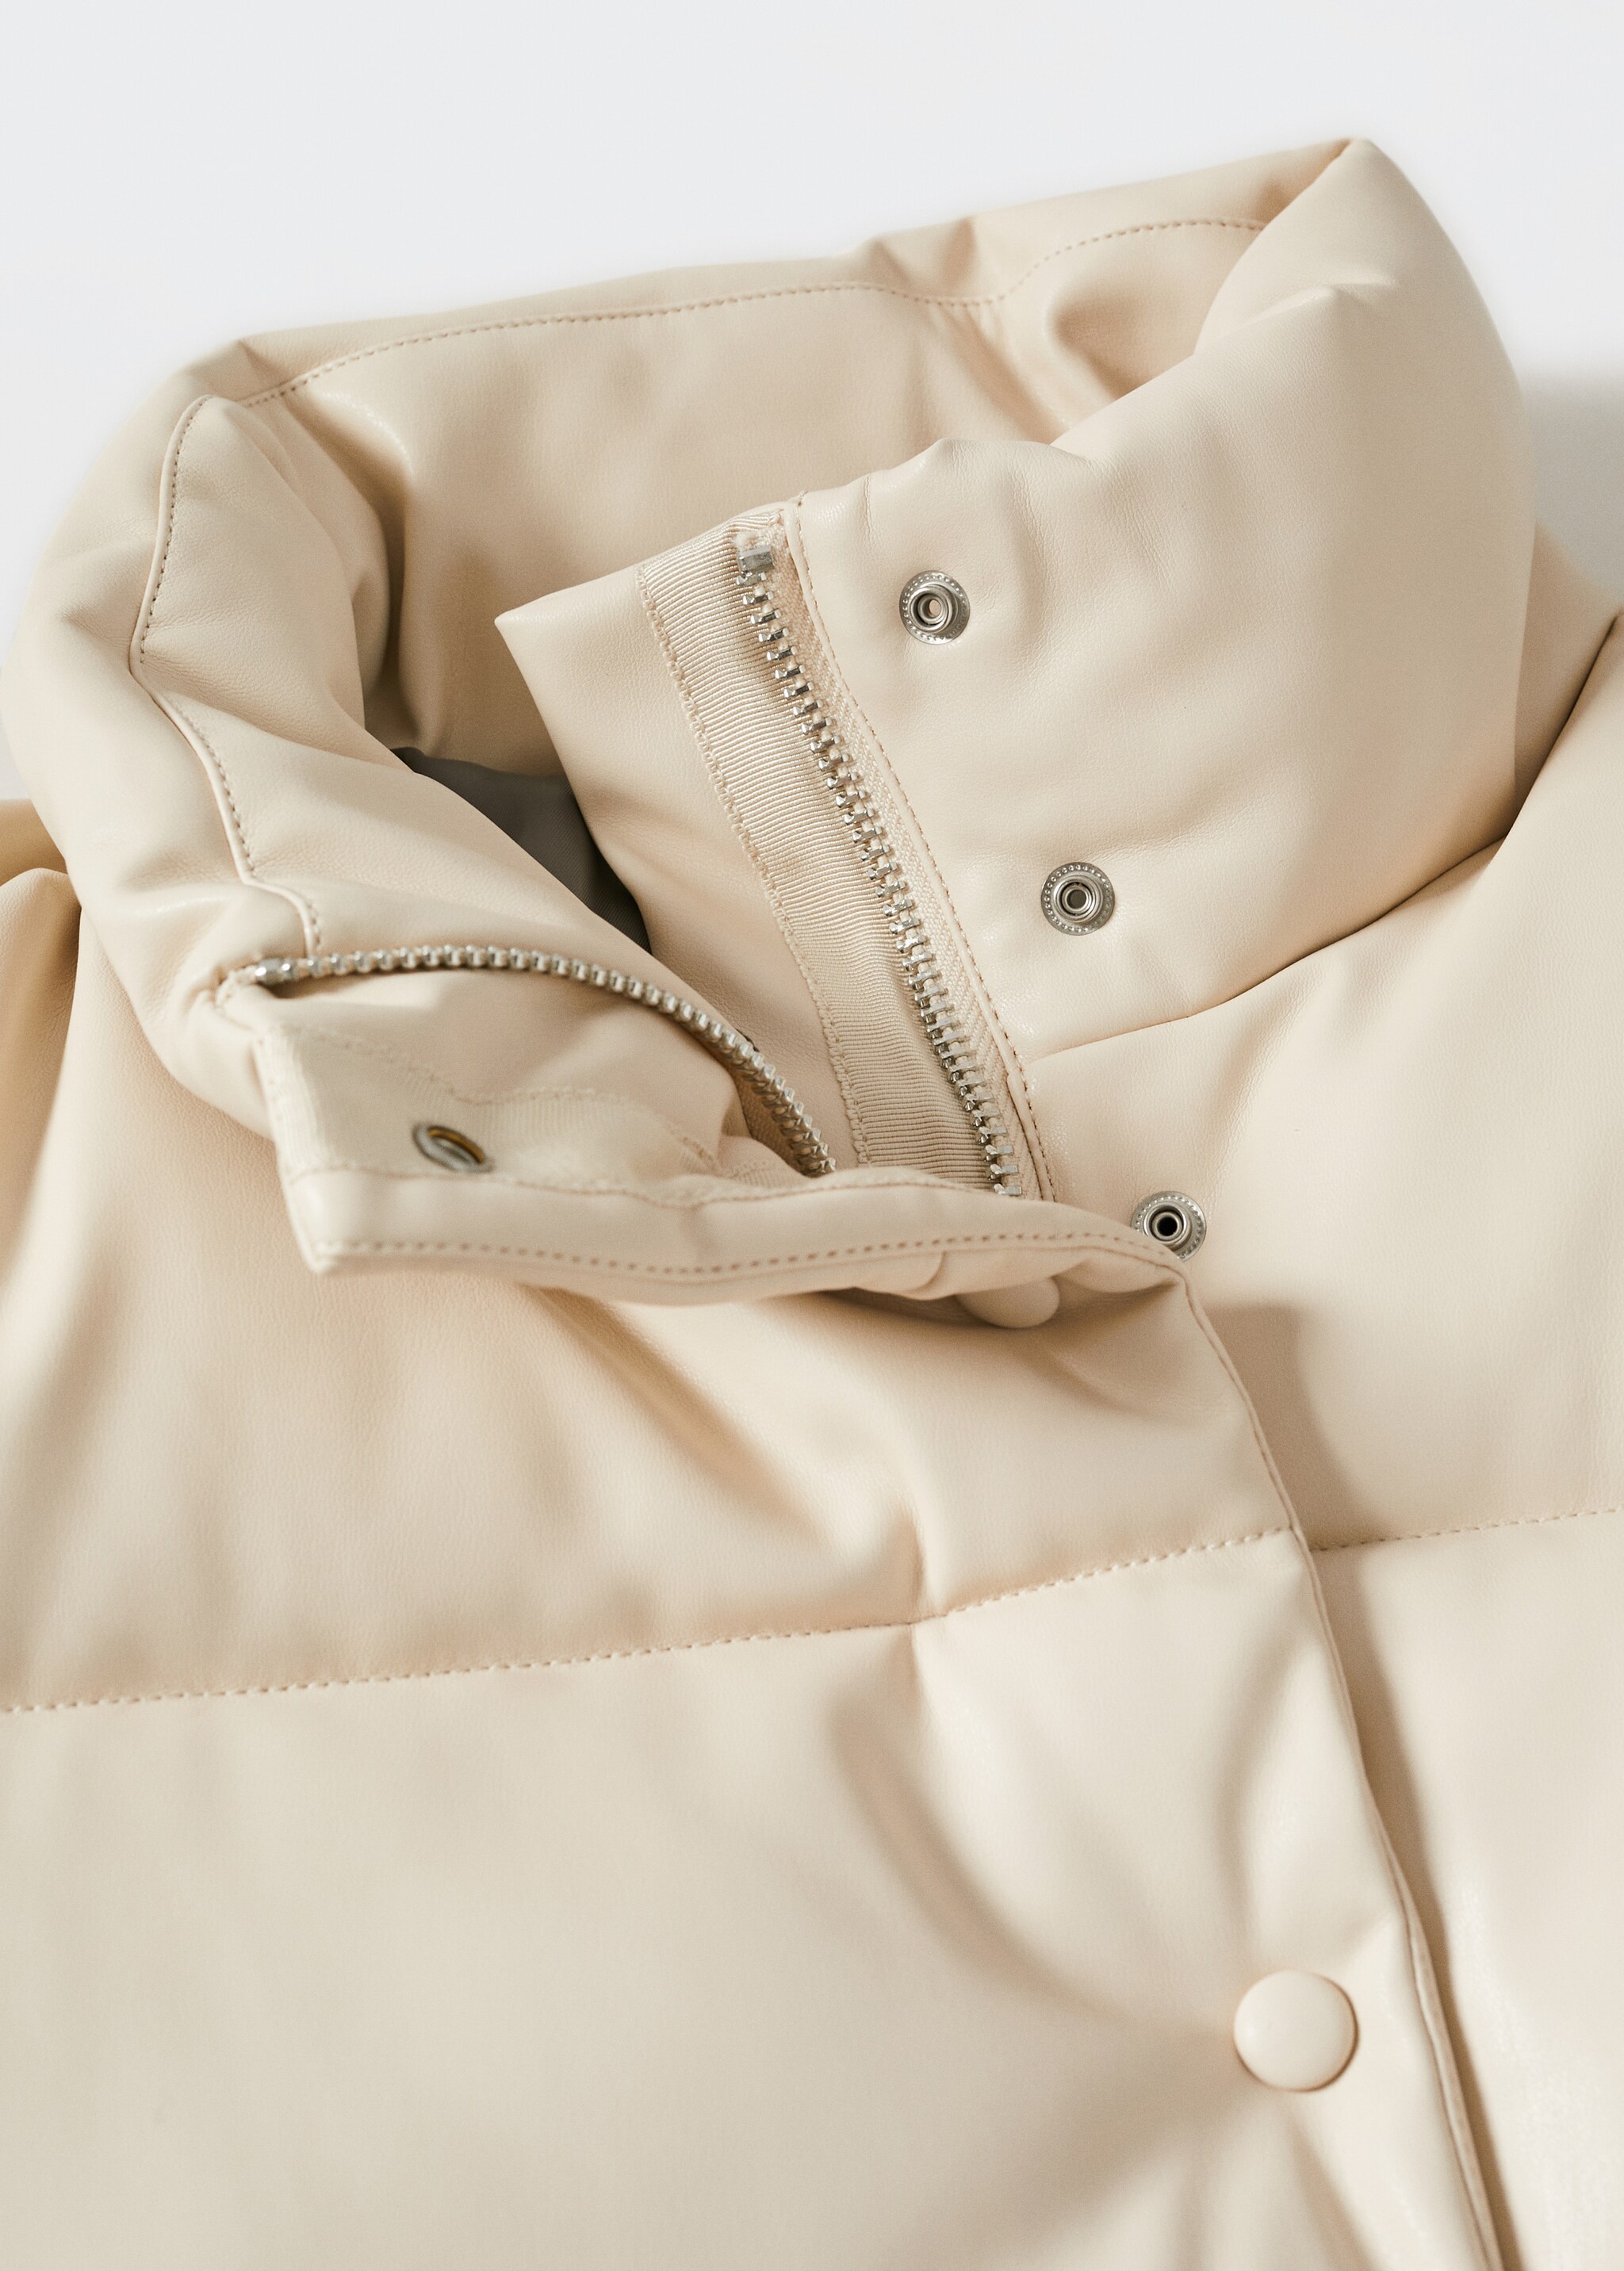 Quilted skin style jacket - Details of the article 8